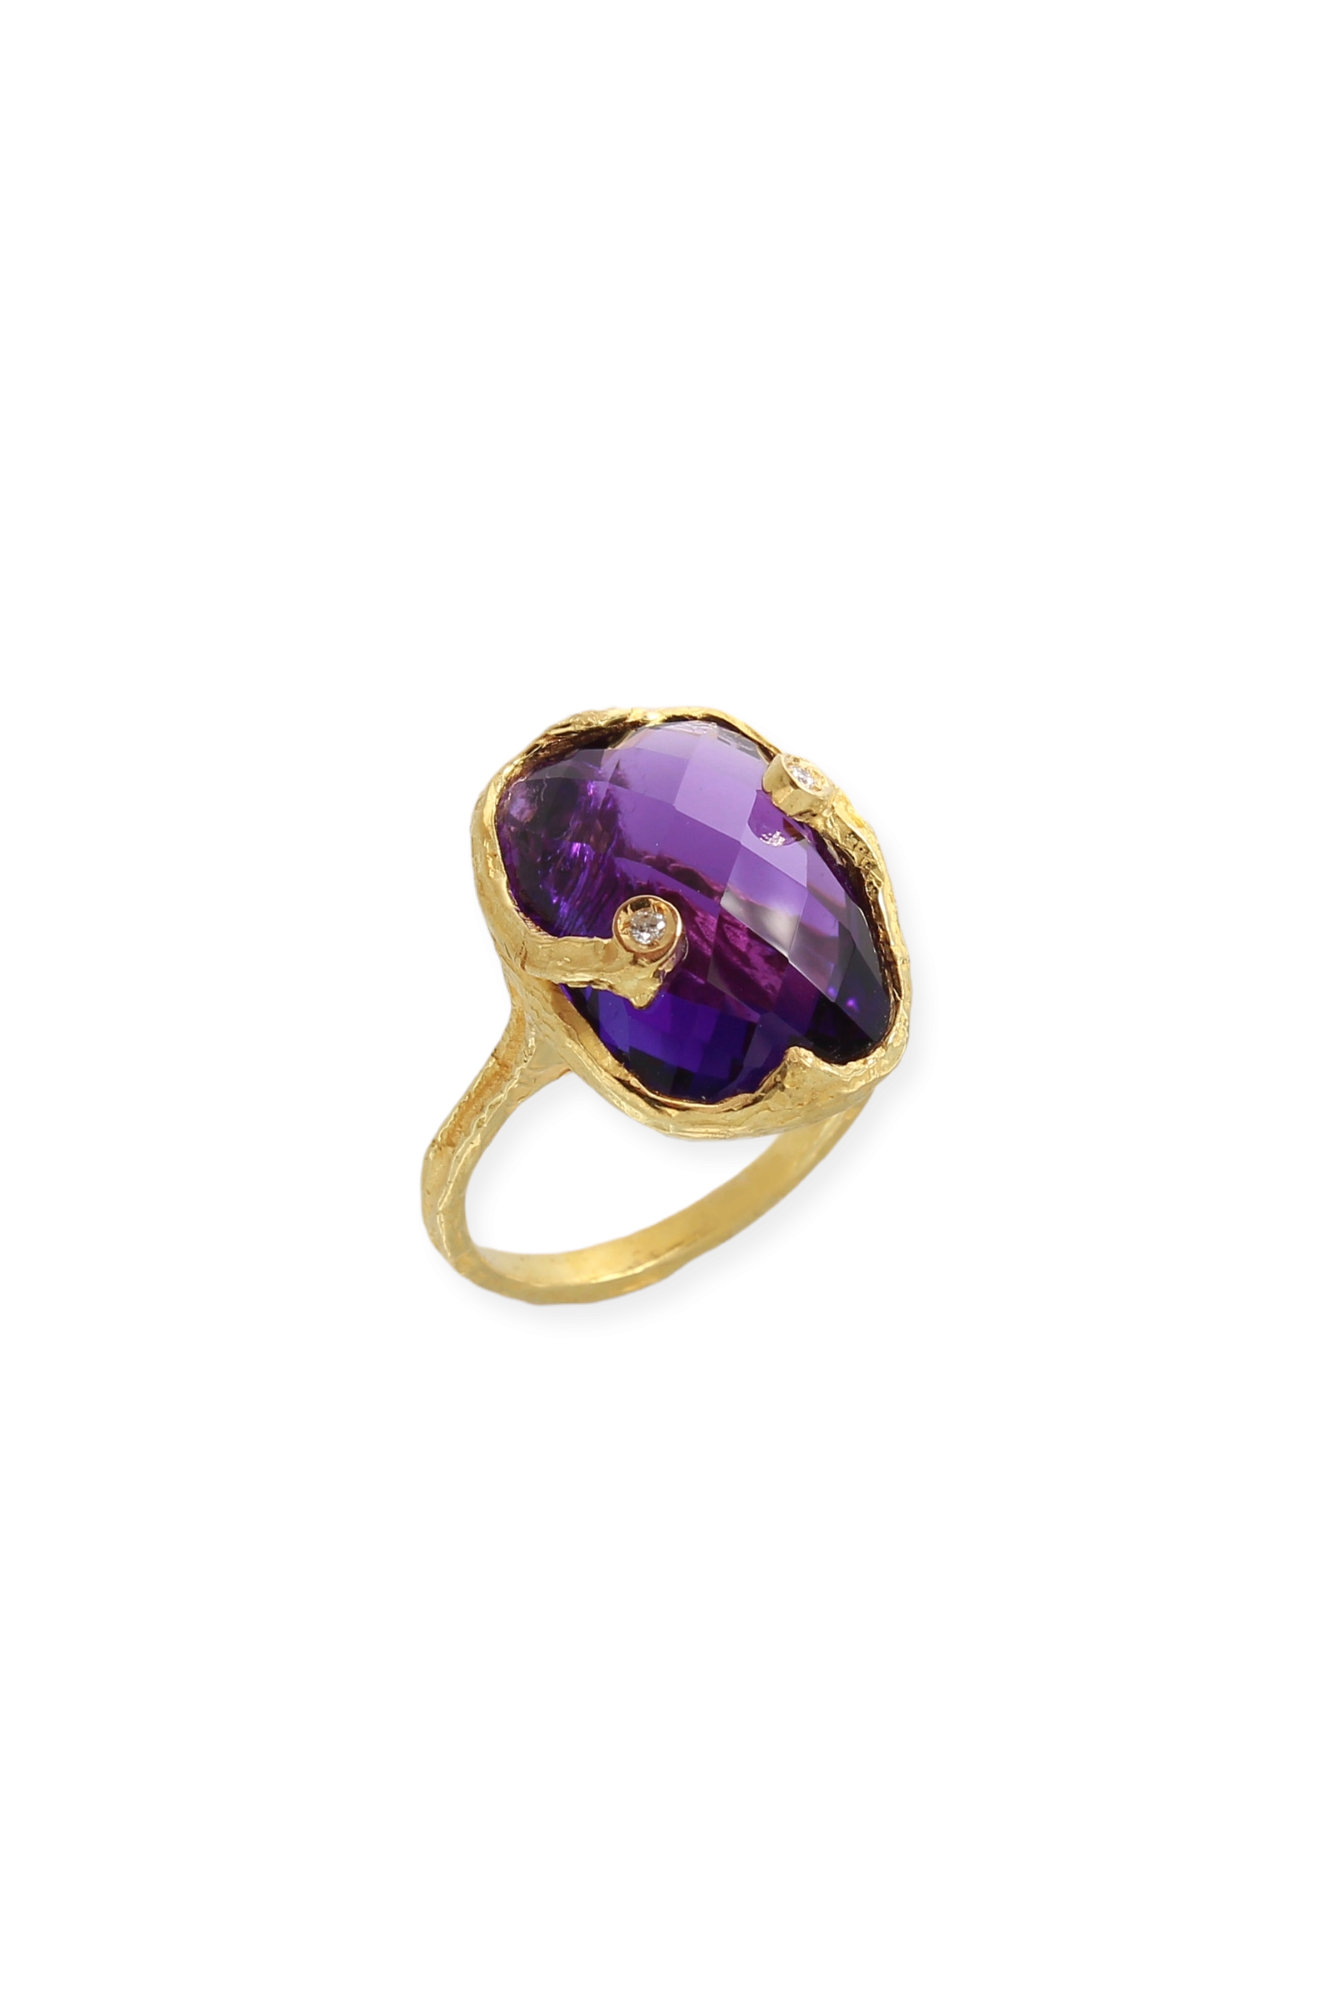 SE258B-18-Kt-Yellow-Gold-Ring-with-Purple-Amethyst-and-Diamonds-1